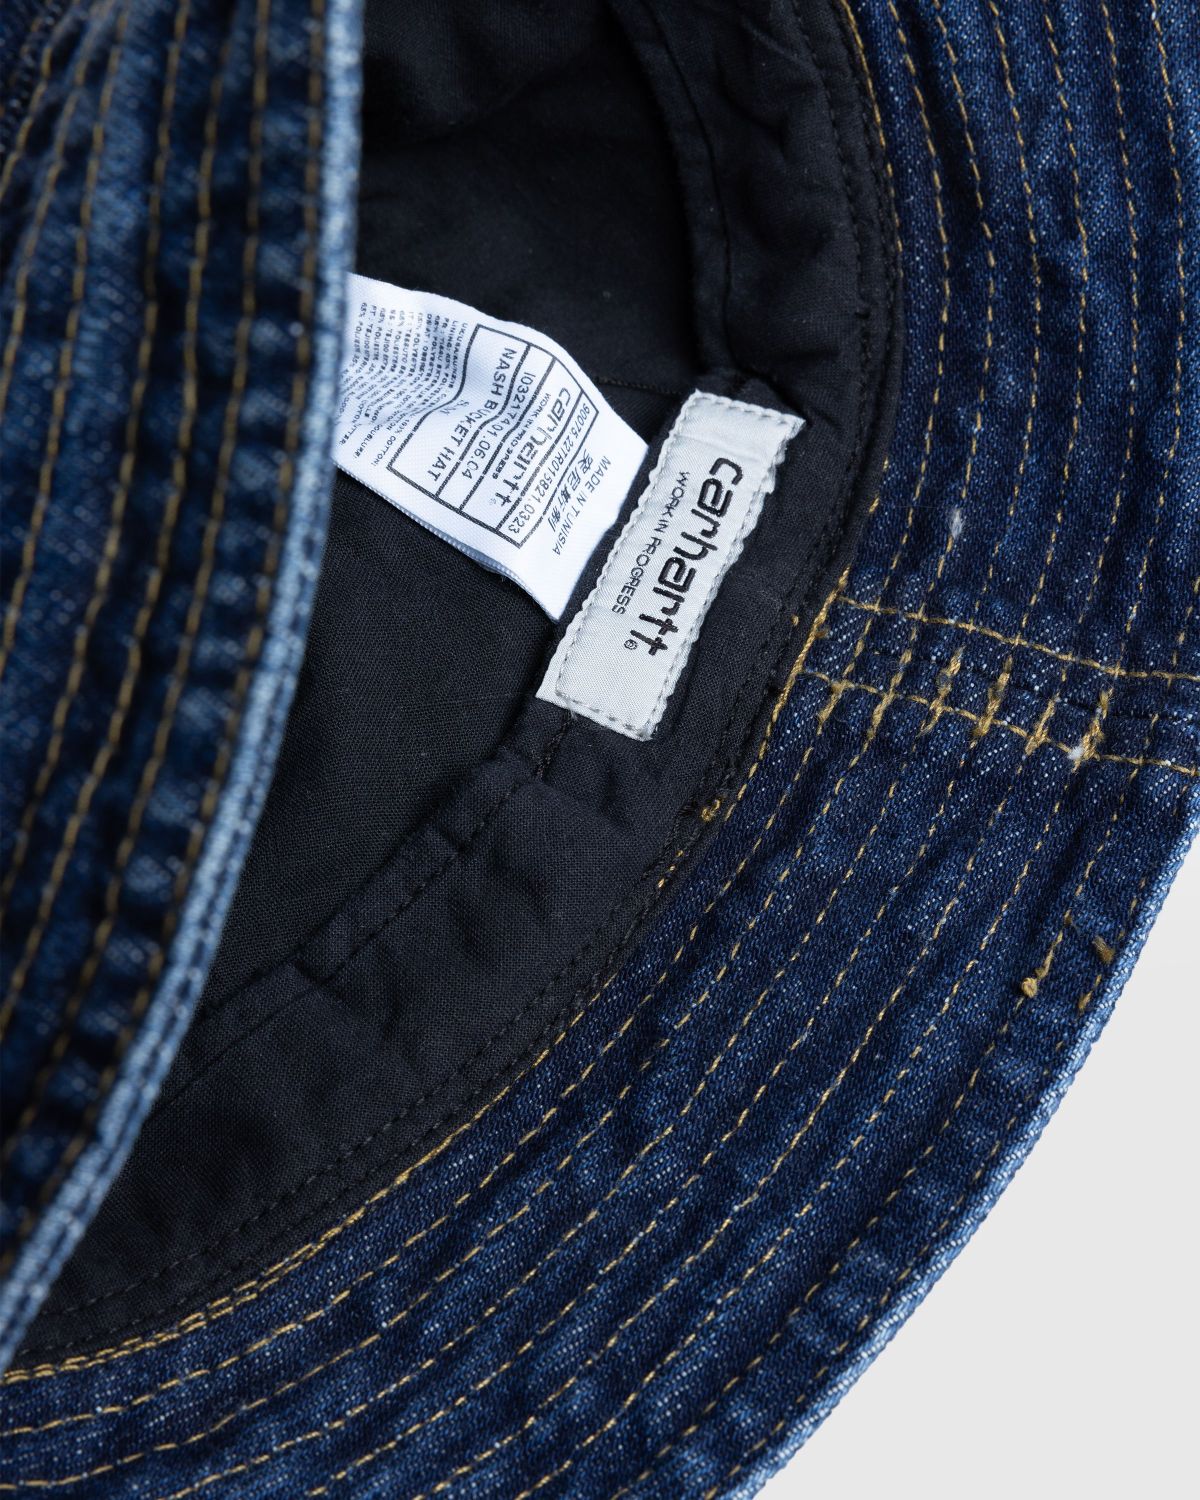 Carhartt Work In Progress for Women SS24 Collection